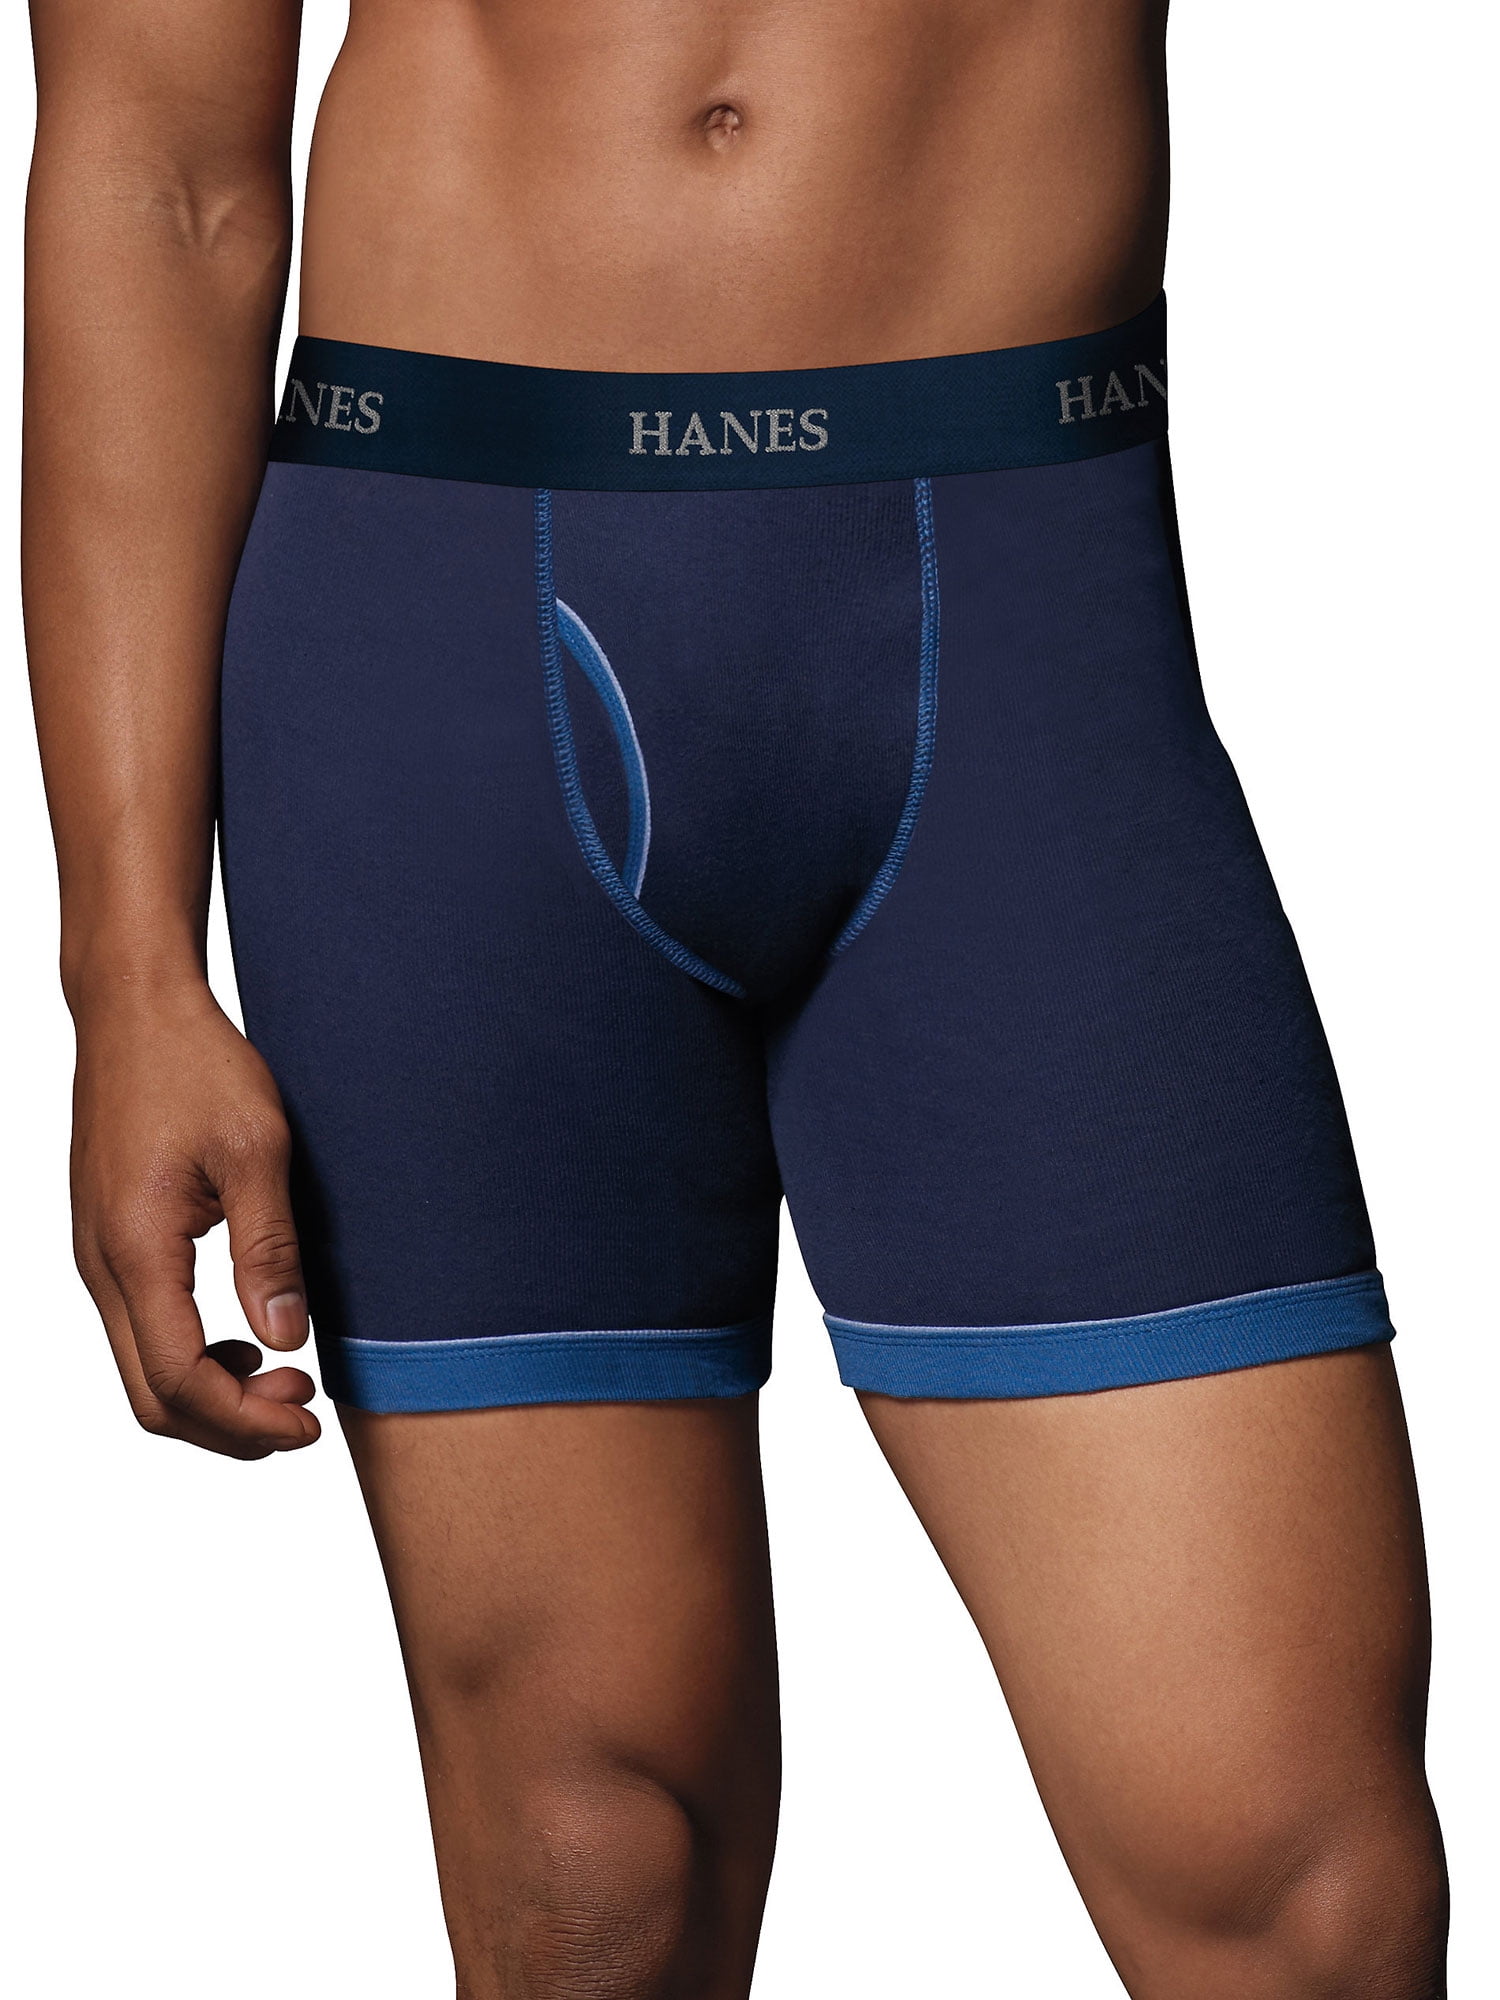 Hanes Ultimate Mens 5-Pack Fashion Boxer Briefs 